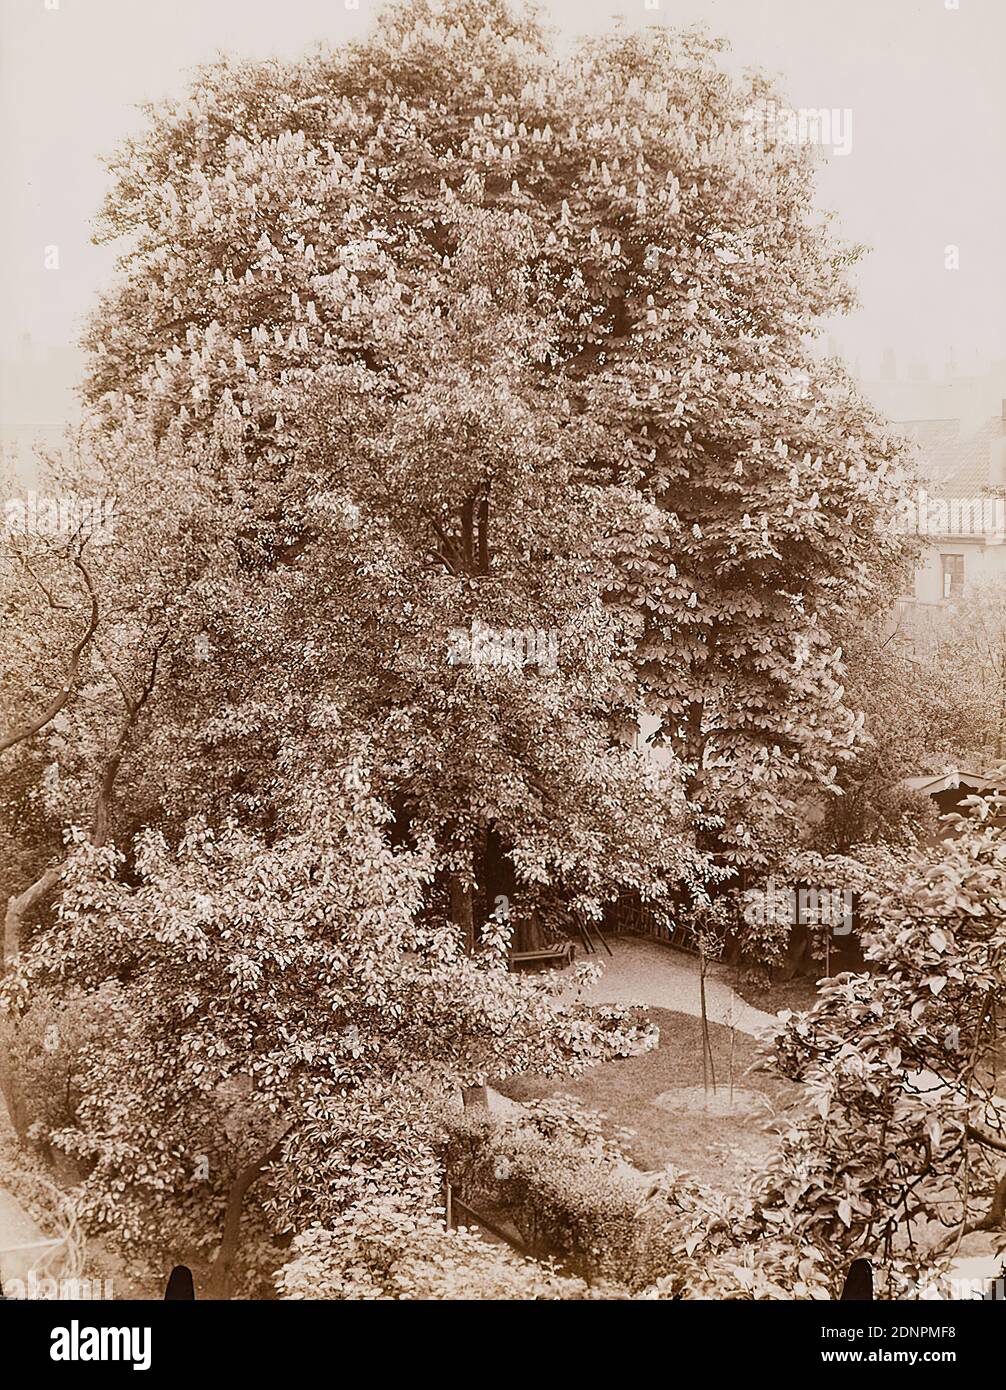 Wilhelm Weimar, chestnut tree in Brockes-Garden at the broom bindery, albumin paper, black and white positive process, image size: height: 17,60 cm; width: 12,50 cm, . Recto in lead: Justus Brinckmann, photography, trees, shrubs, garden, St. George Stock Photo